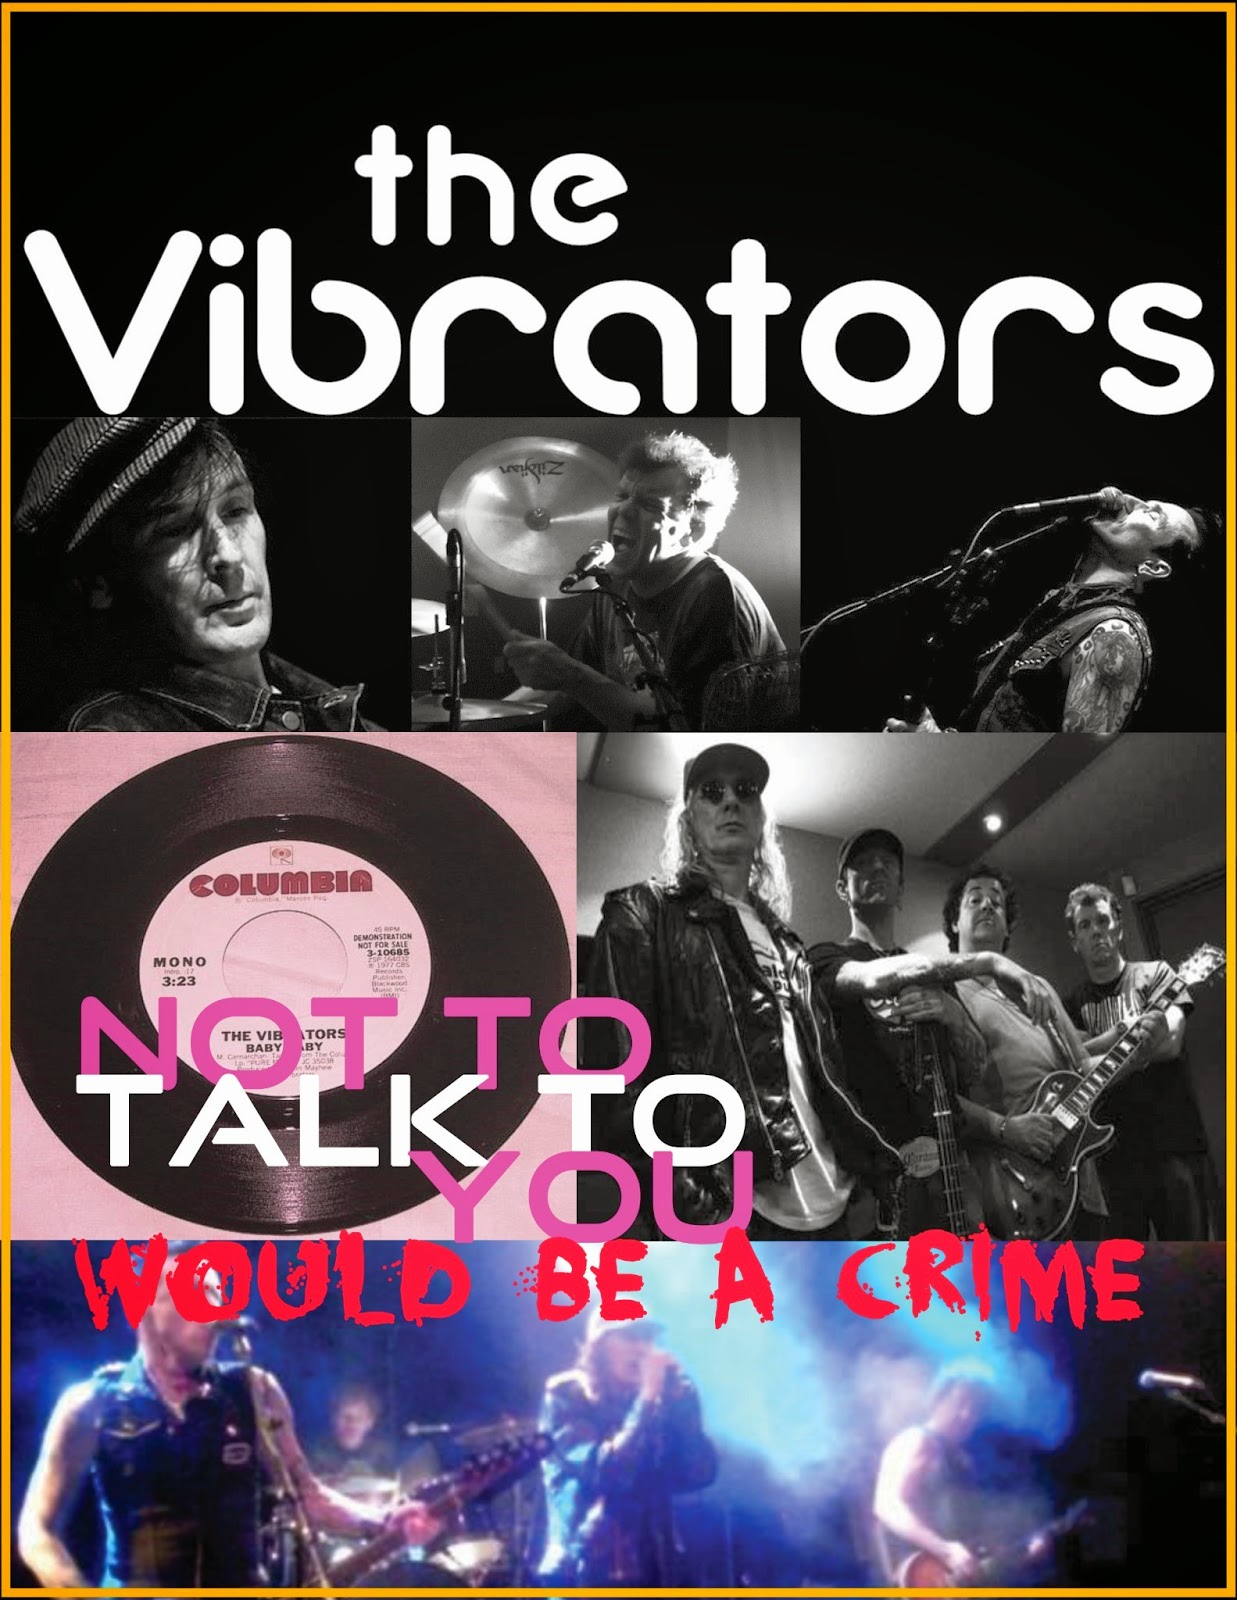 Interview With A Vibrator stockport merseyway